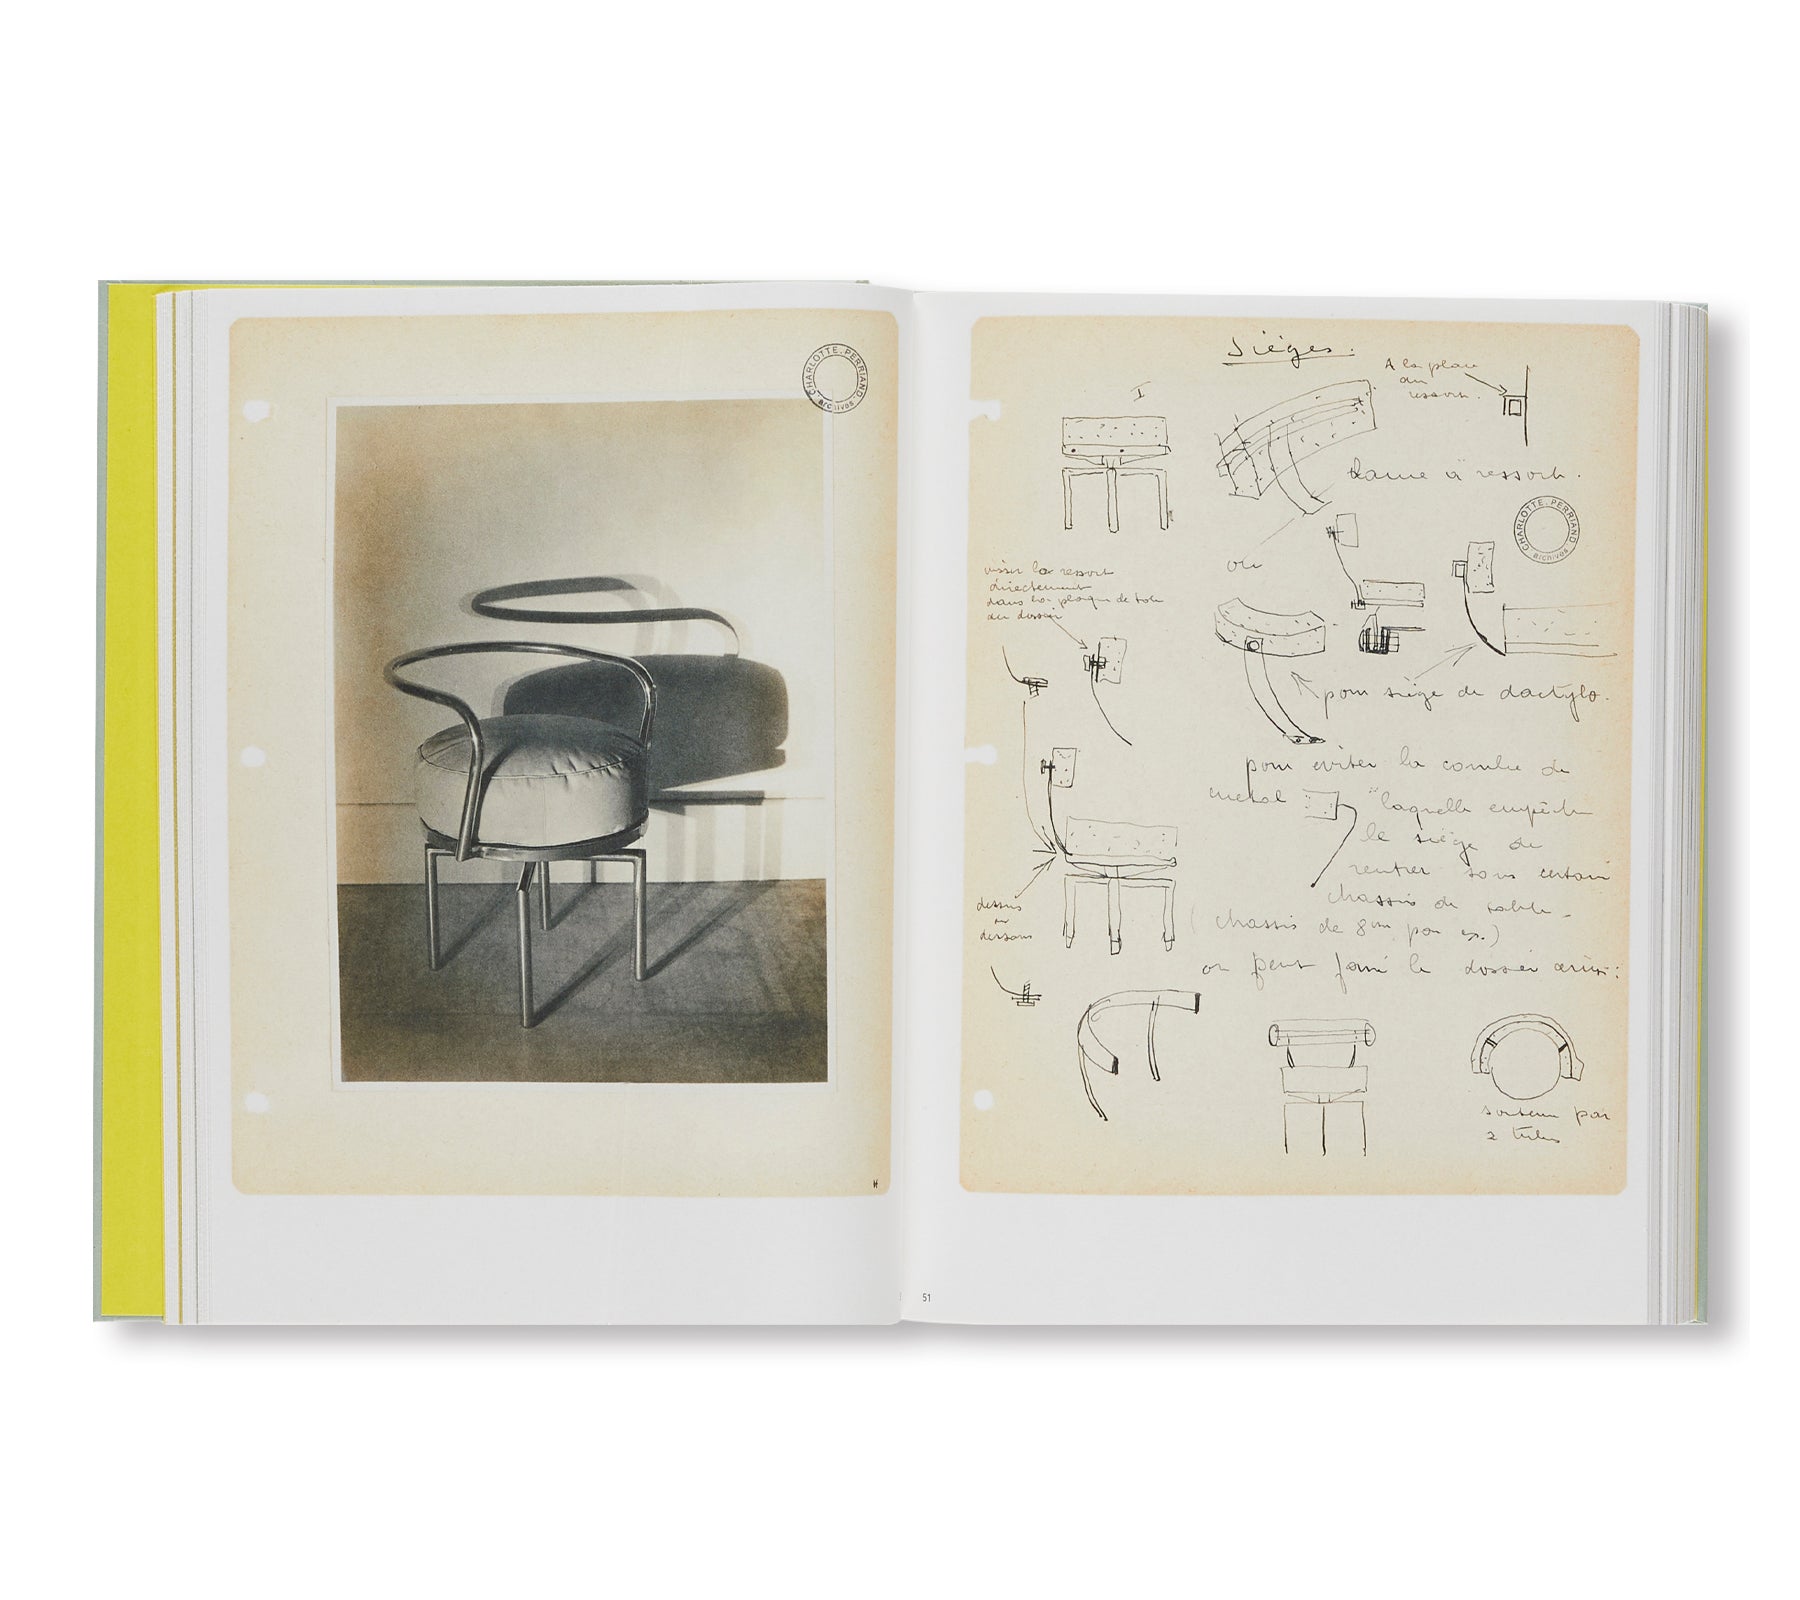 THE MODERN LIFE EXHIBITION CATALOGUE by Charlotte Perriand